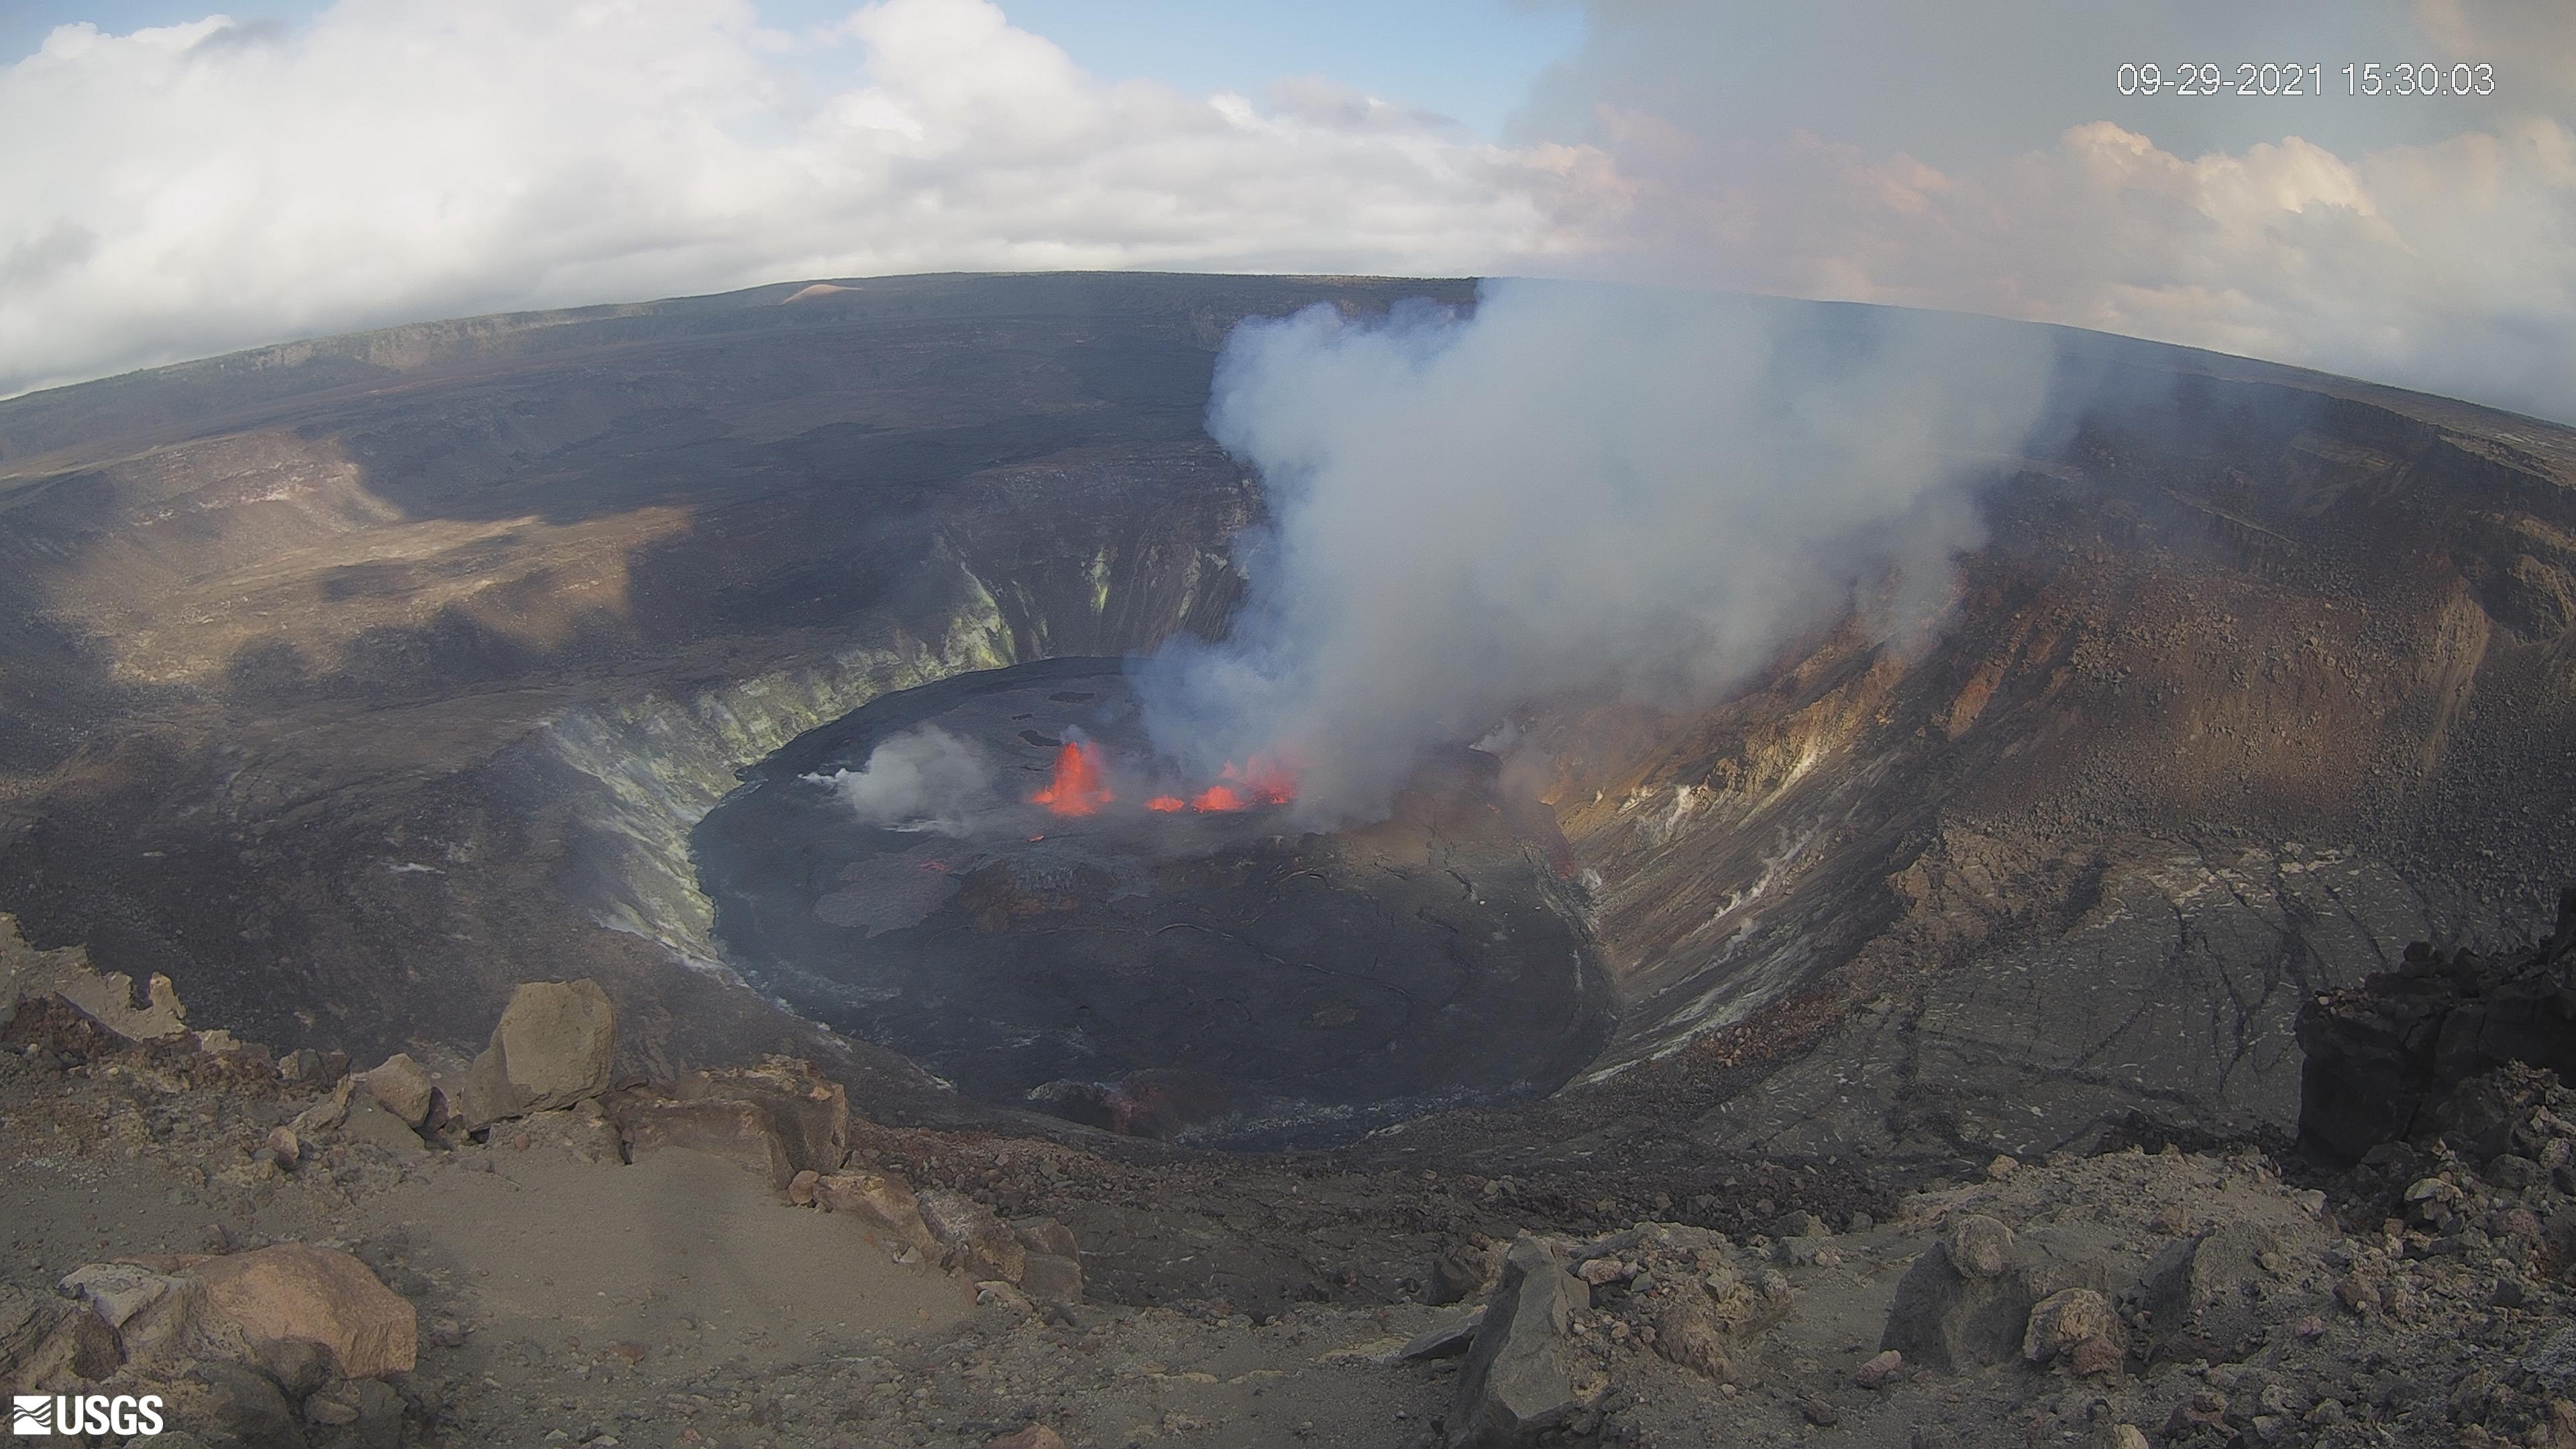 General view of lava surfacing on the Halema'uma'u crater of Kilauea volcano in Kilauea, Hawaii, U.S. September 29, 2021, in this still image provided by the USGS surveillance camera. Mandatory credit USGS/via REUTERS